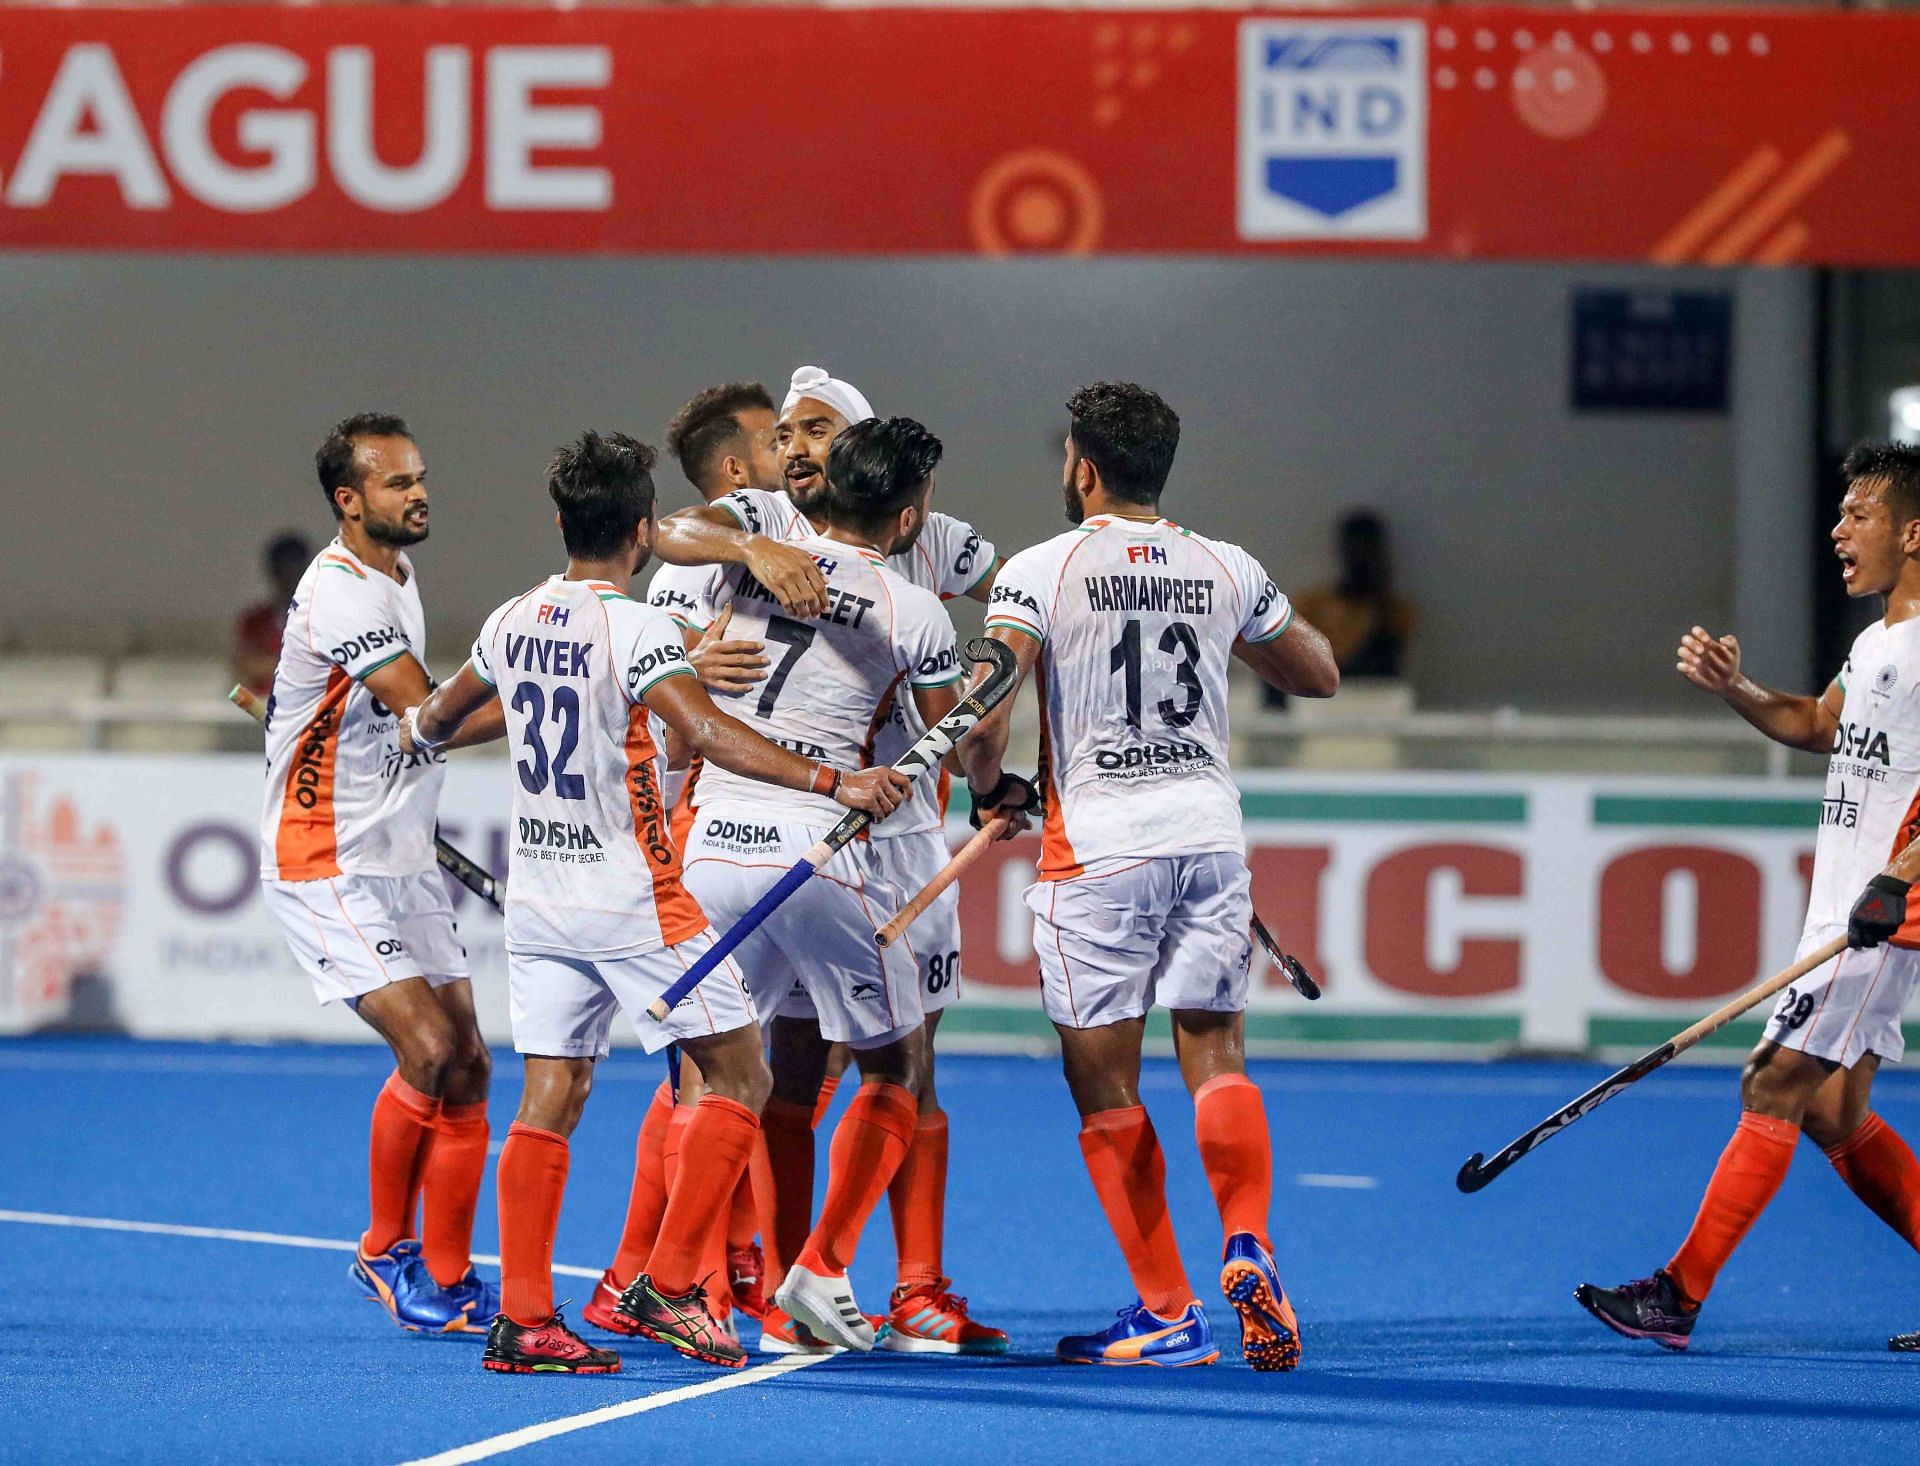 The Indian team celebrate a goal against Argentina. (PC: Hockey India)